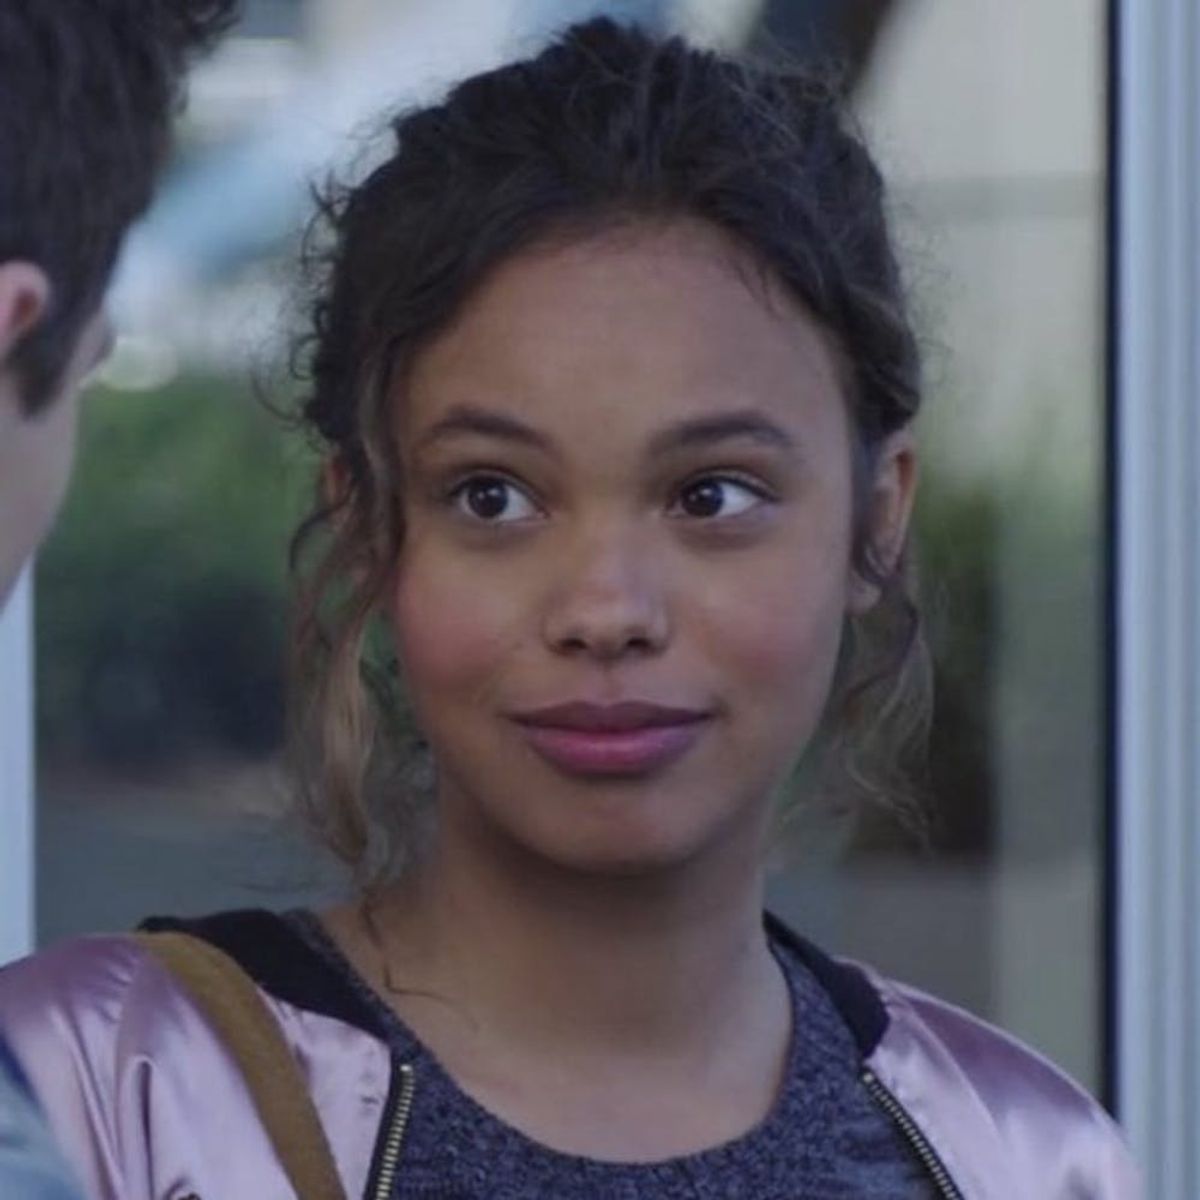 Fans Are Furious at “13 Reasons Why” for Posting *This* Brow-Raising Tweet